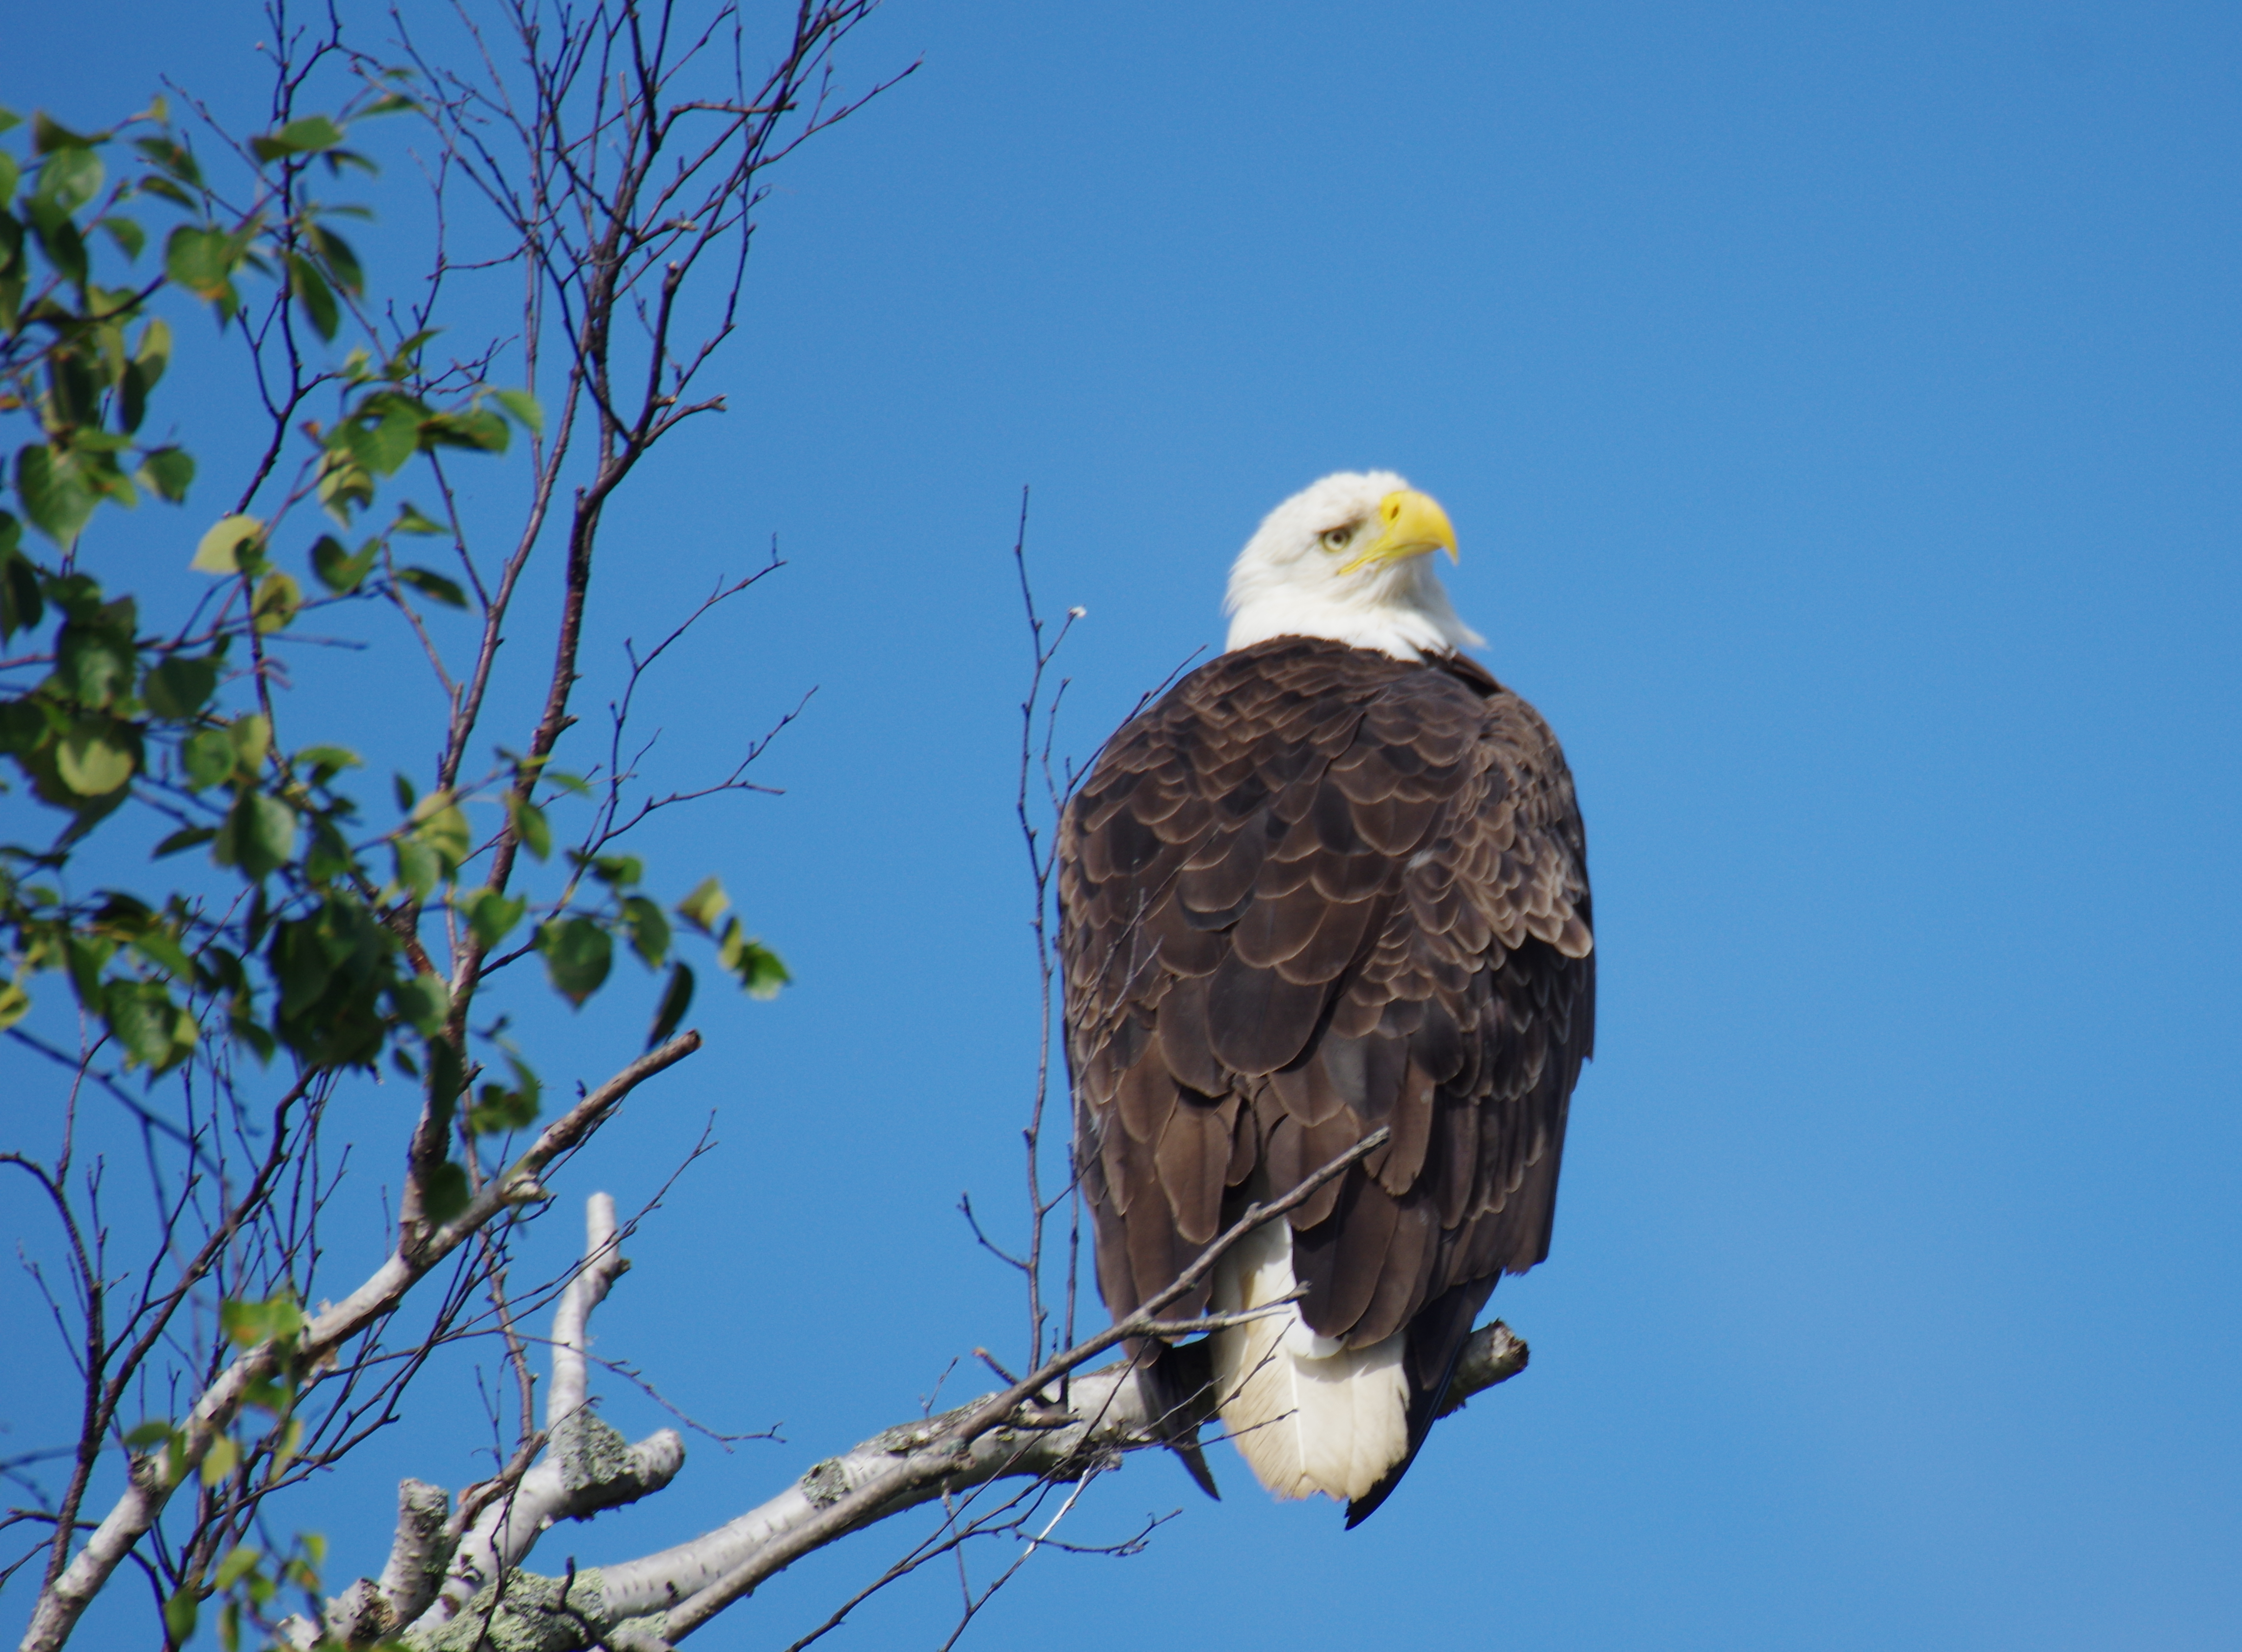 The Bald Eagle also nests in the Boreal ecozone